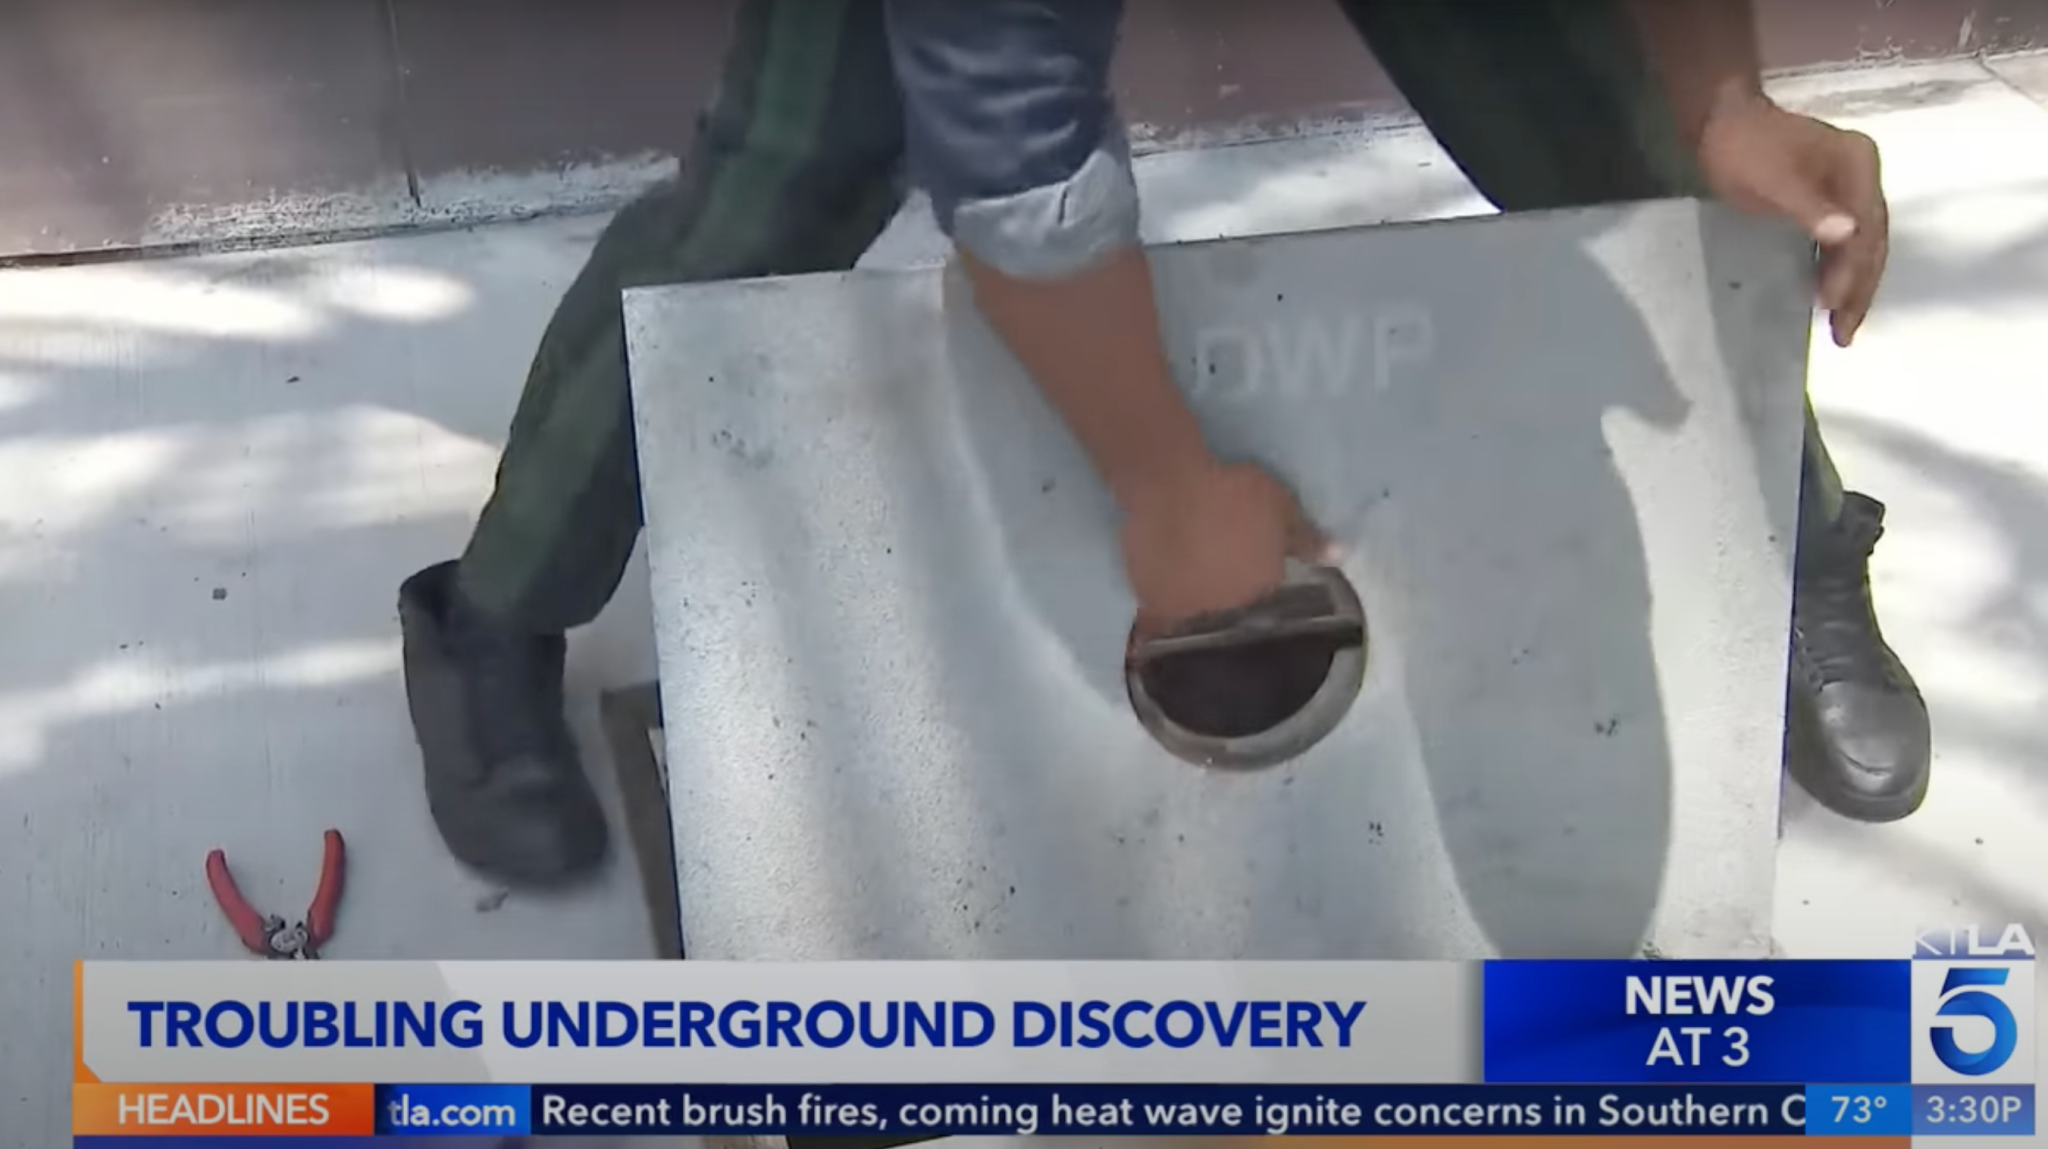 Homeless man found living in underground vault outside LA museum